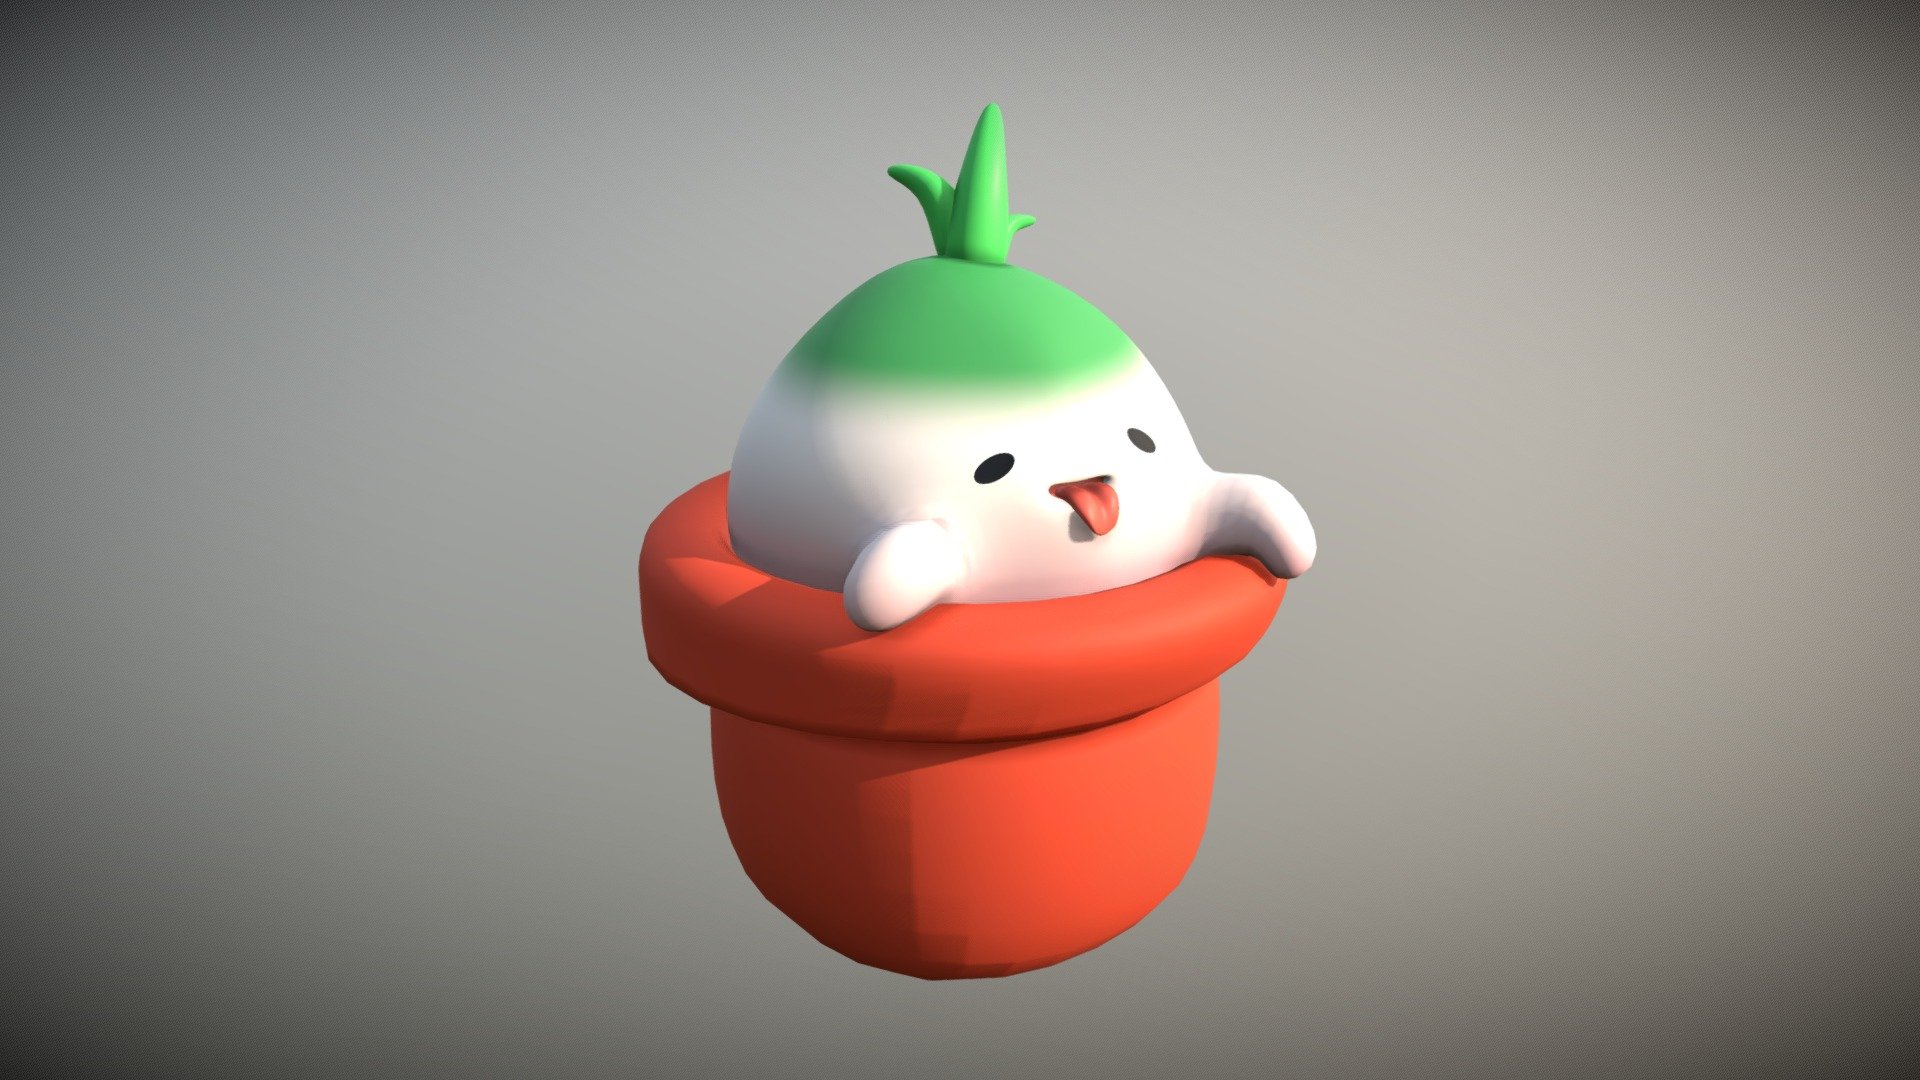 What if turnips are alive!?
Inspired from the Animal Crossing New Horizon game, I was really in to the game so I might try to pet a turnip someday hahaha.

Follow me on Instragram @vrtech
3D Page : https://www.facebook.com/TheFifthDimensionStudio - A little turnip - 3D model by VrTech 3d model